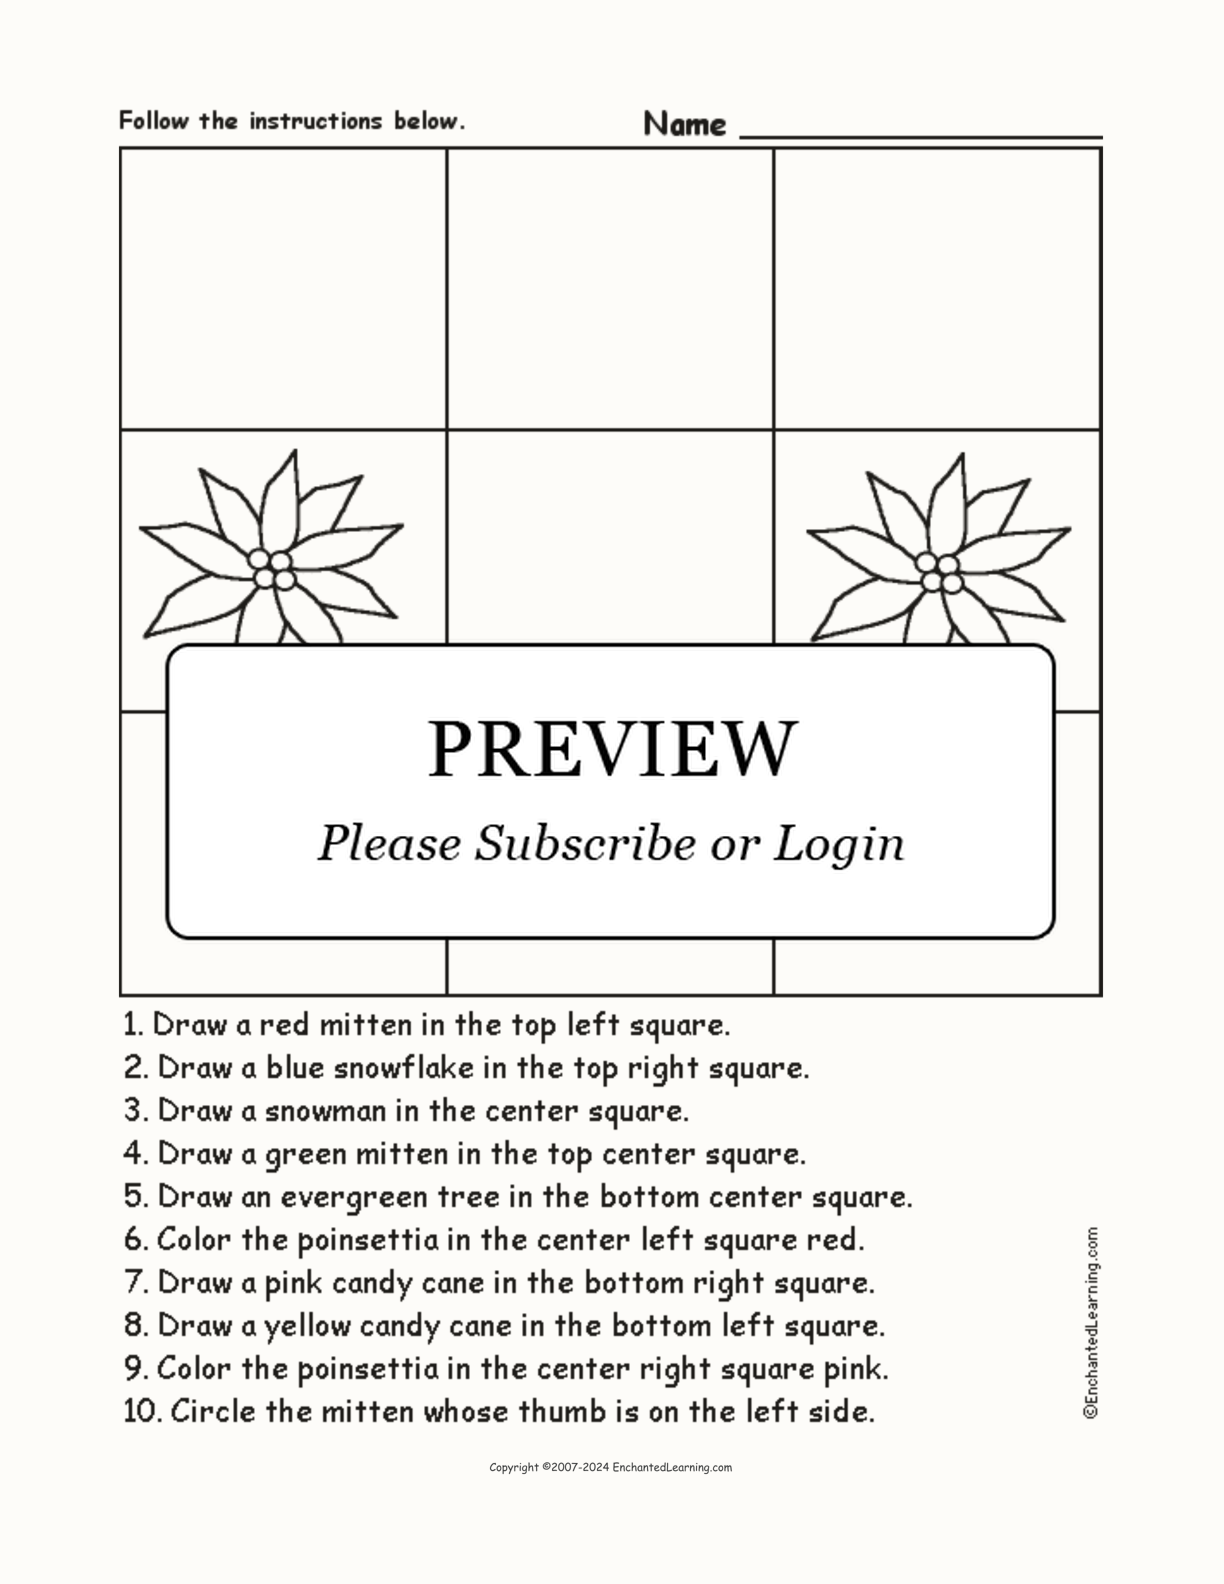 Winter - Follow the Instructions interactive worksheet page 1